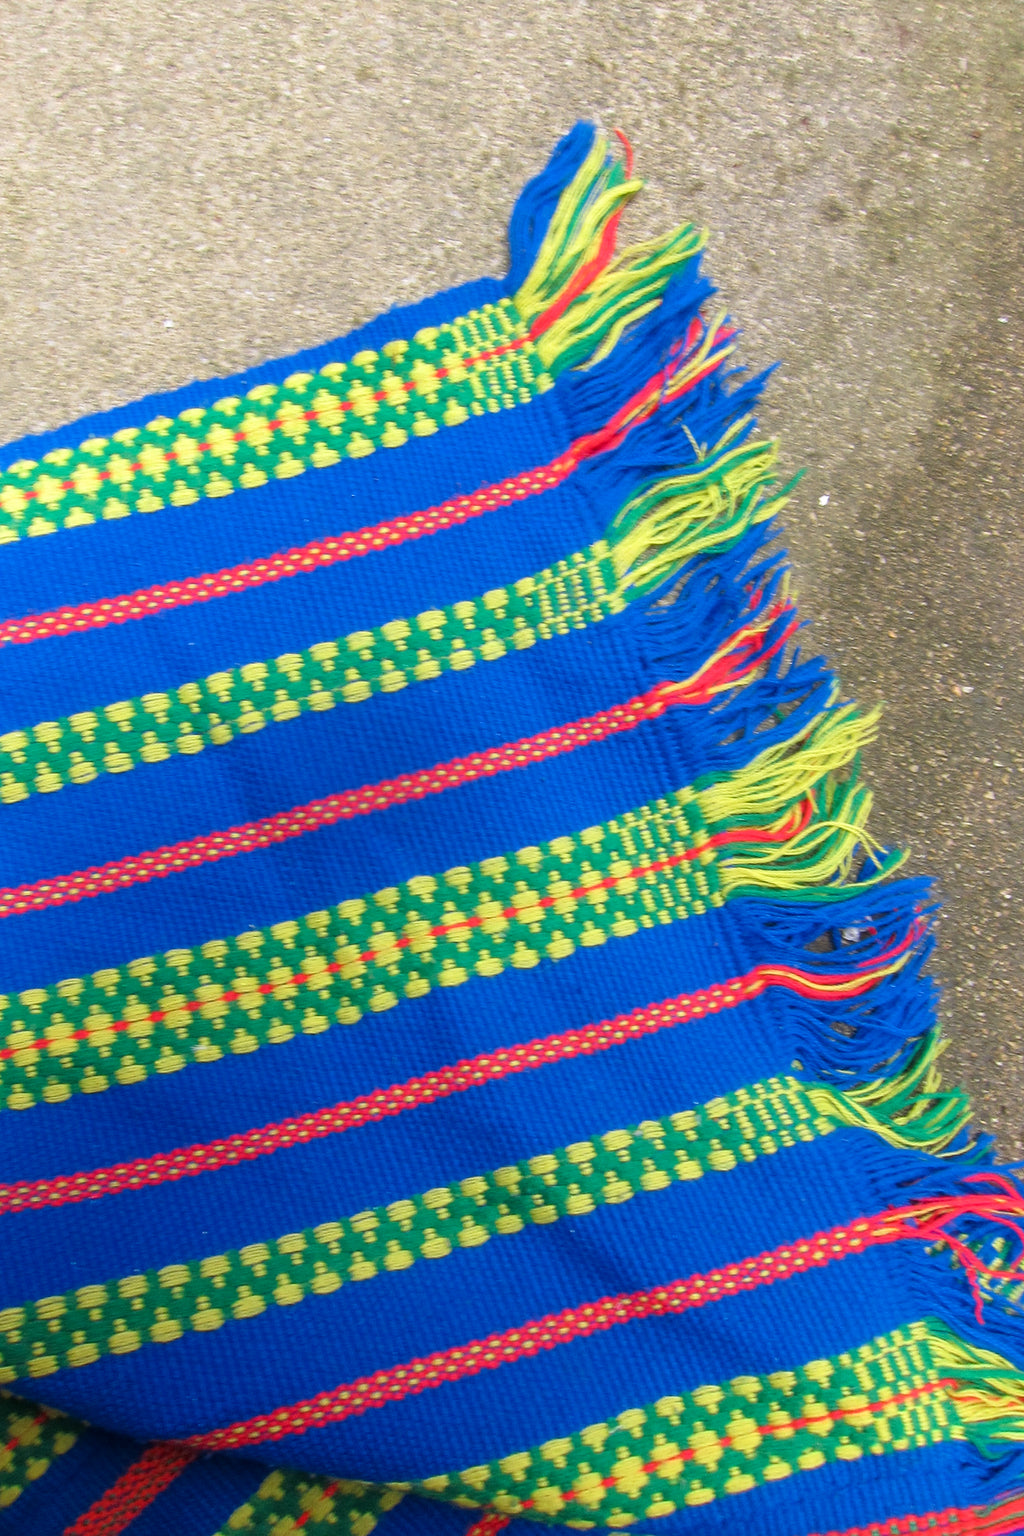 vintage blue and neon green blanket